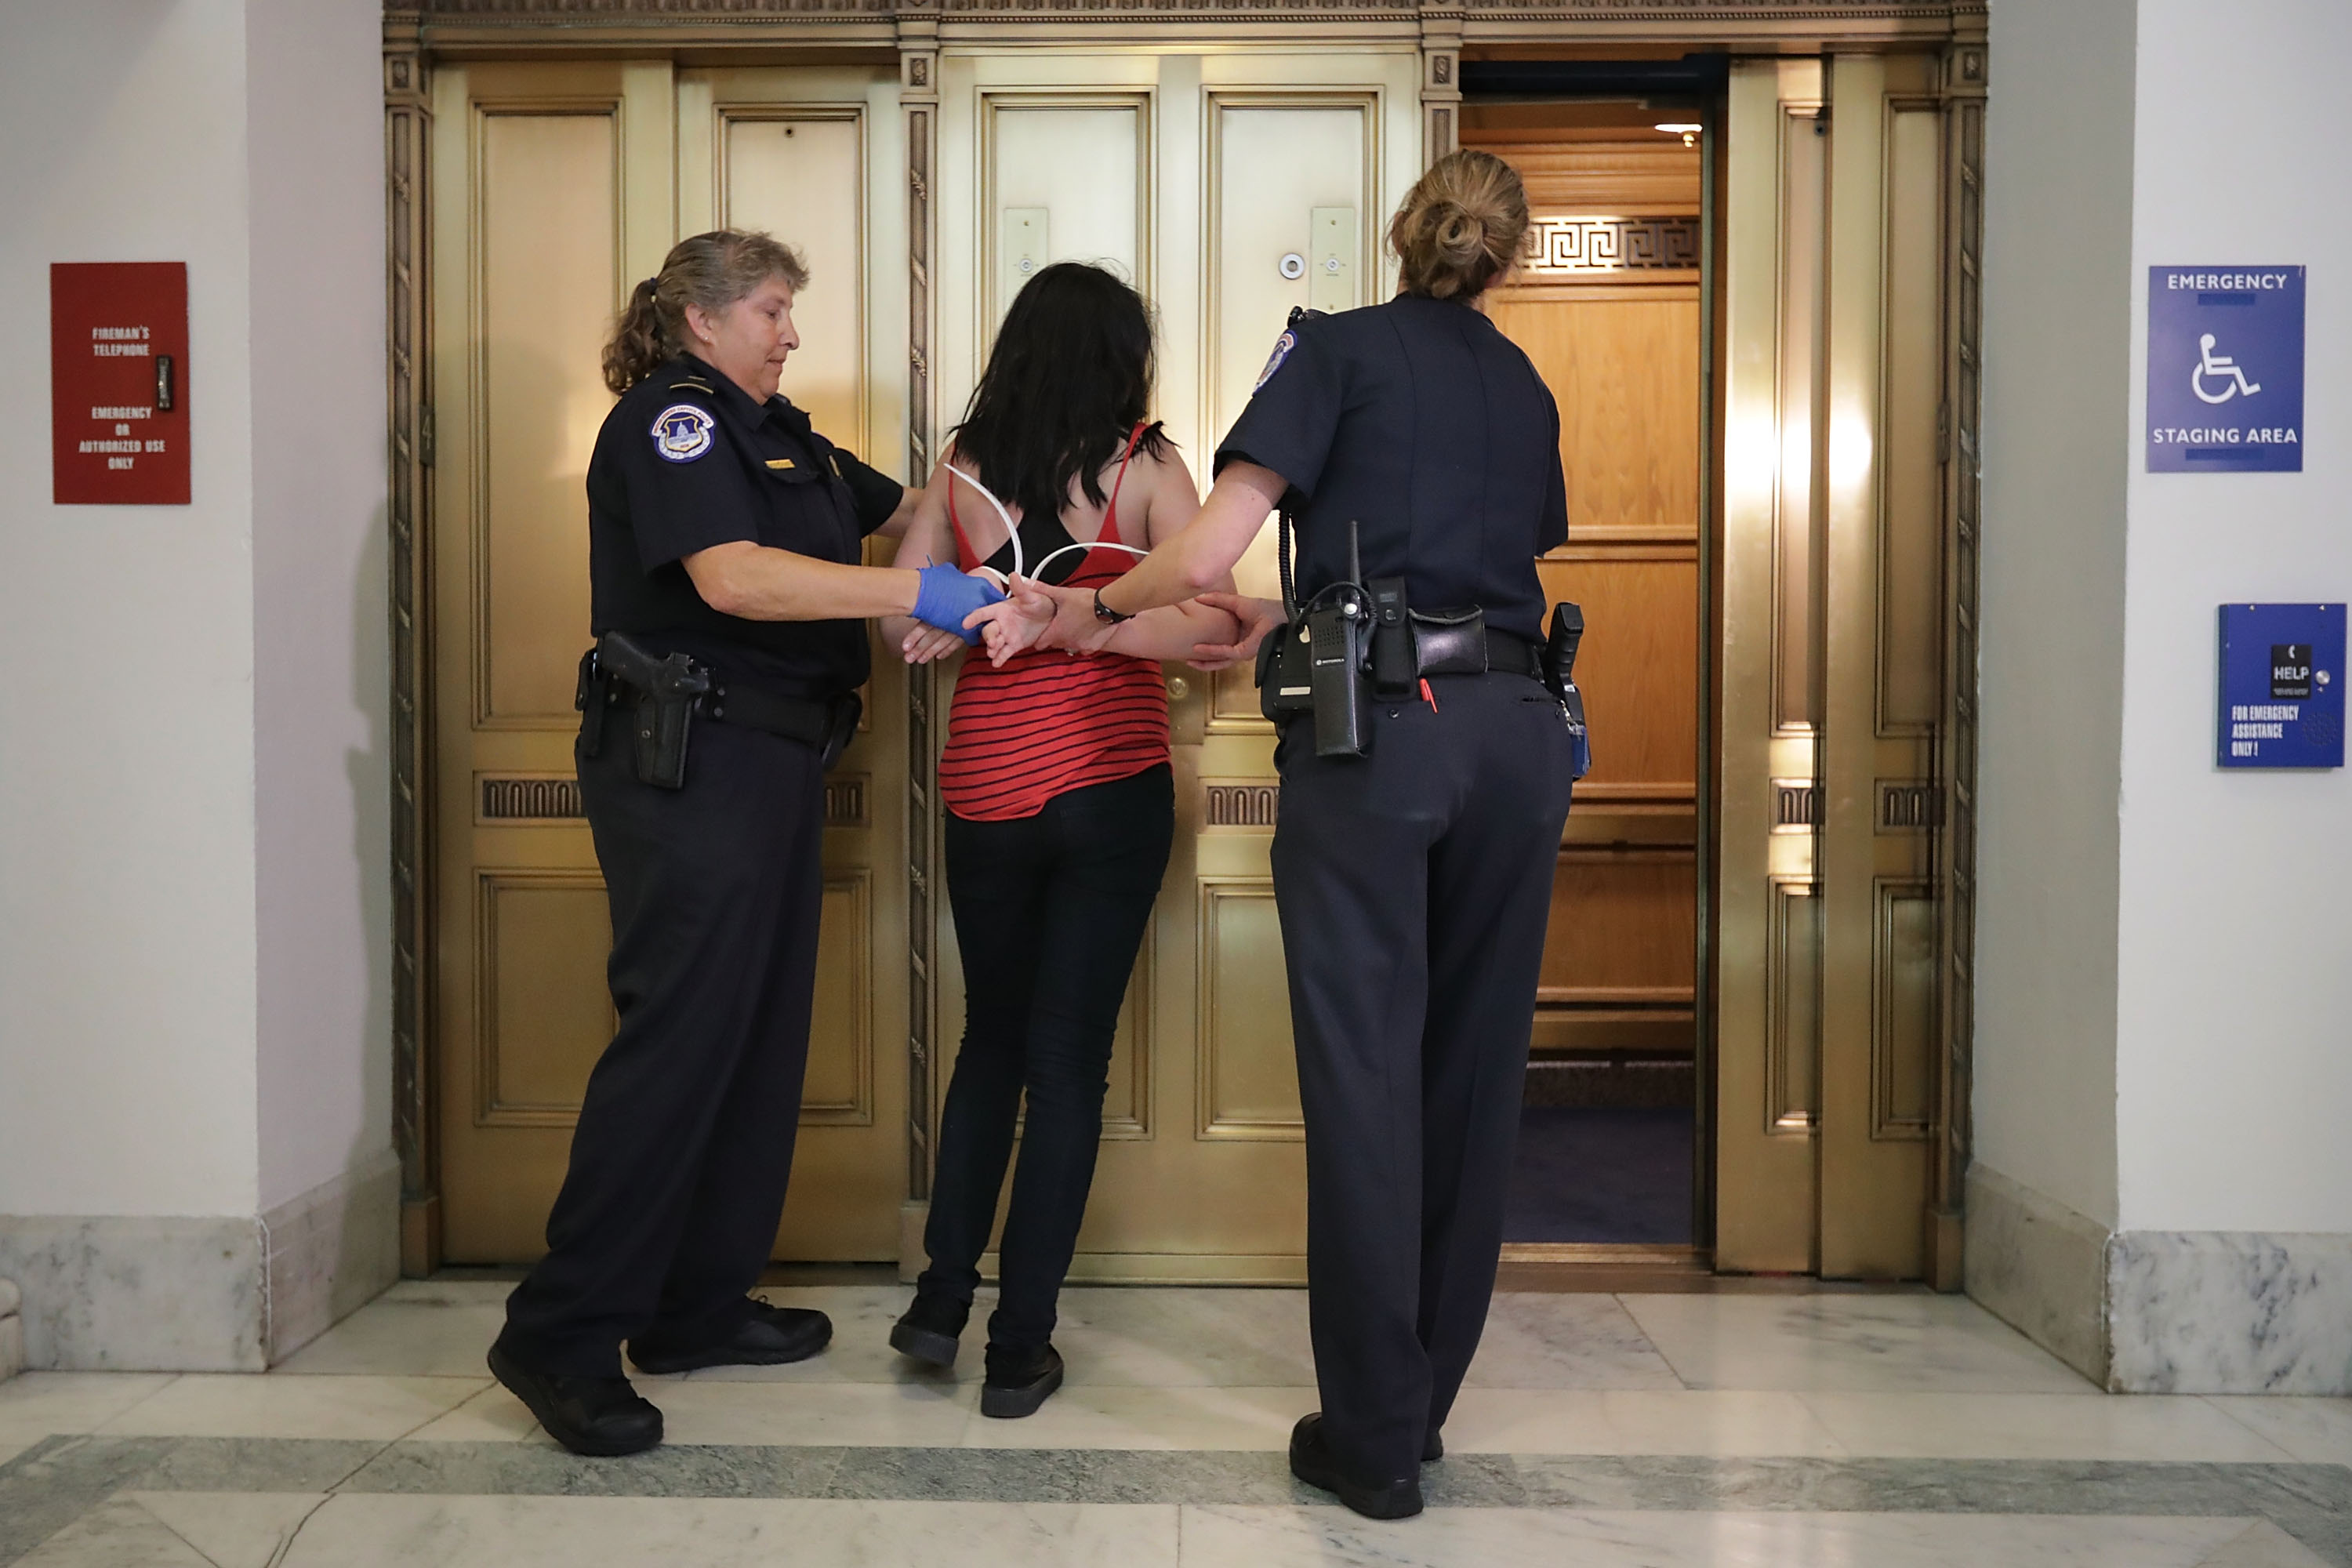 U.S. Capitol Police officers arrest a protester who was demonstrating against Republican health care reform legislation outside the offices of Sen. Jeff Flake (R-AZ) in the Russell Senate Office Building on Capitol Hill, July 10, 2017 in Washington. (Chip Somodevilla&mdash;Getty Images)